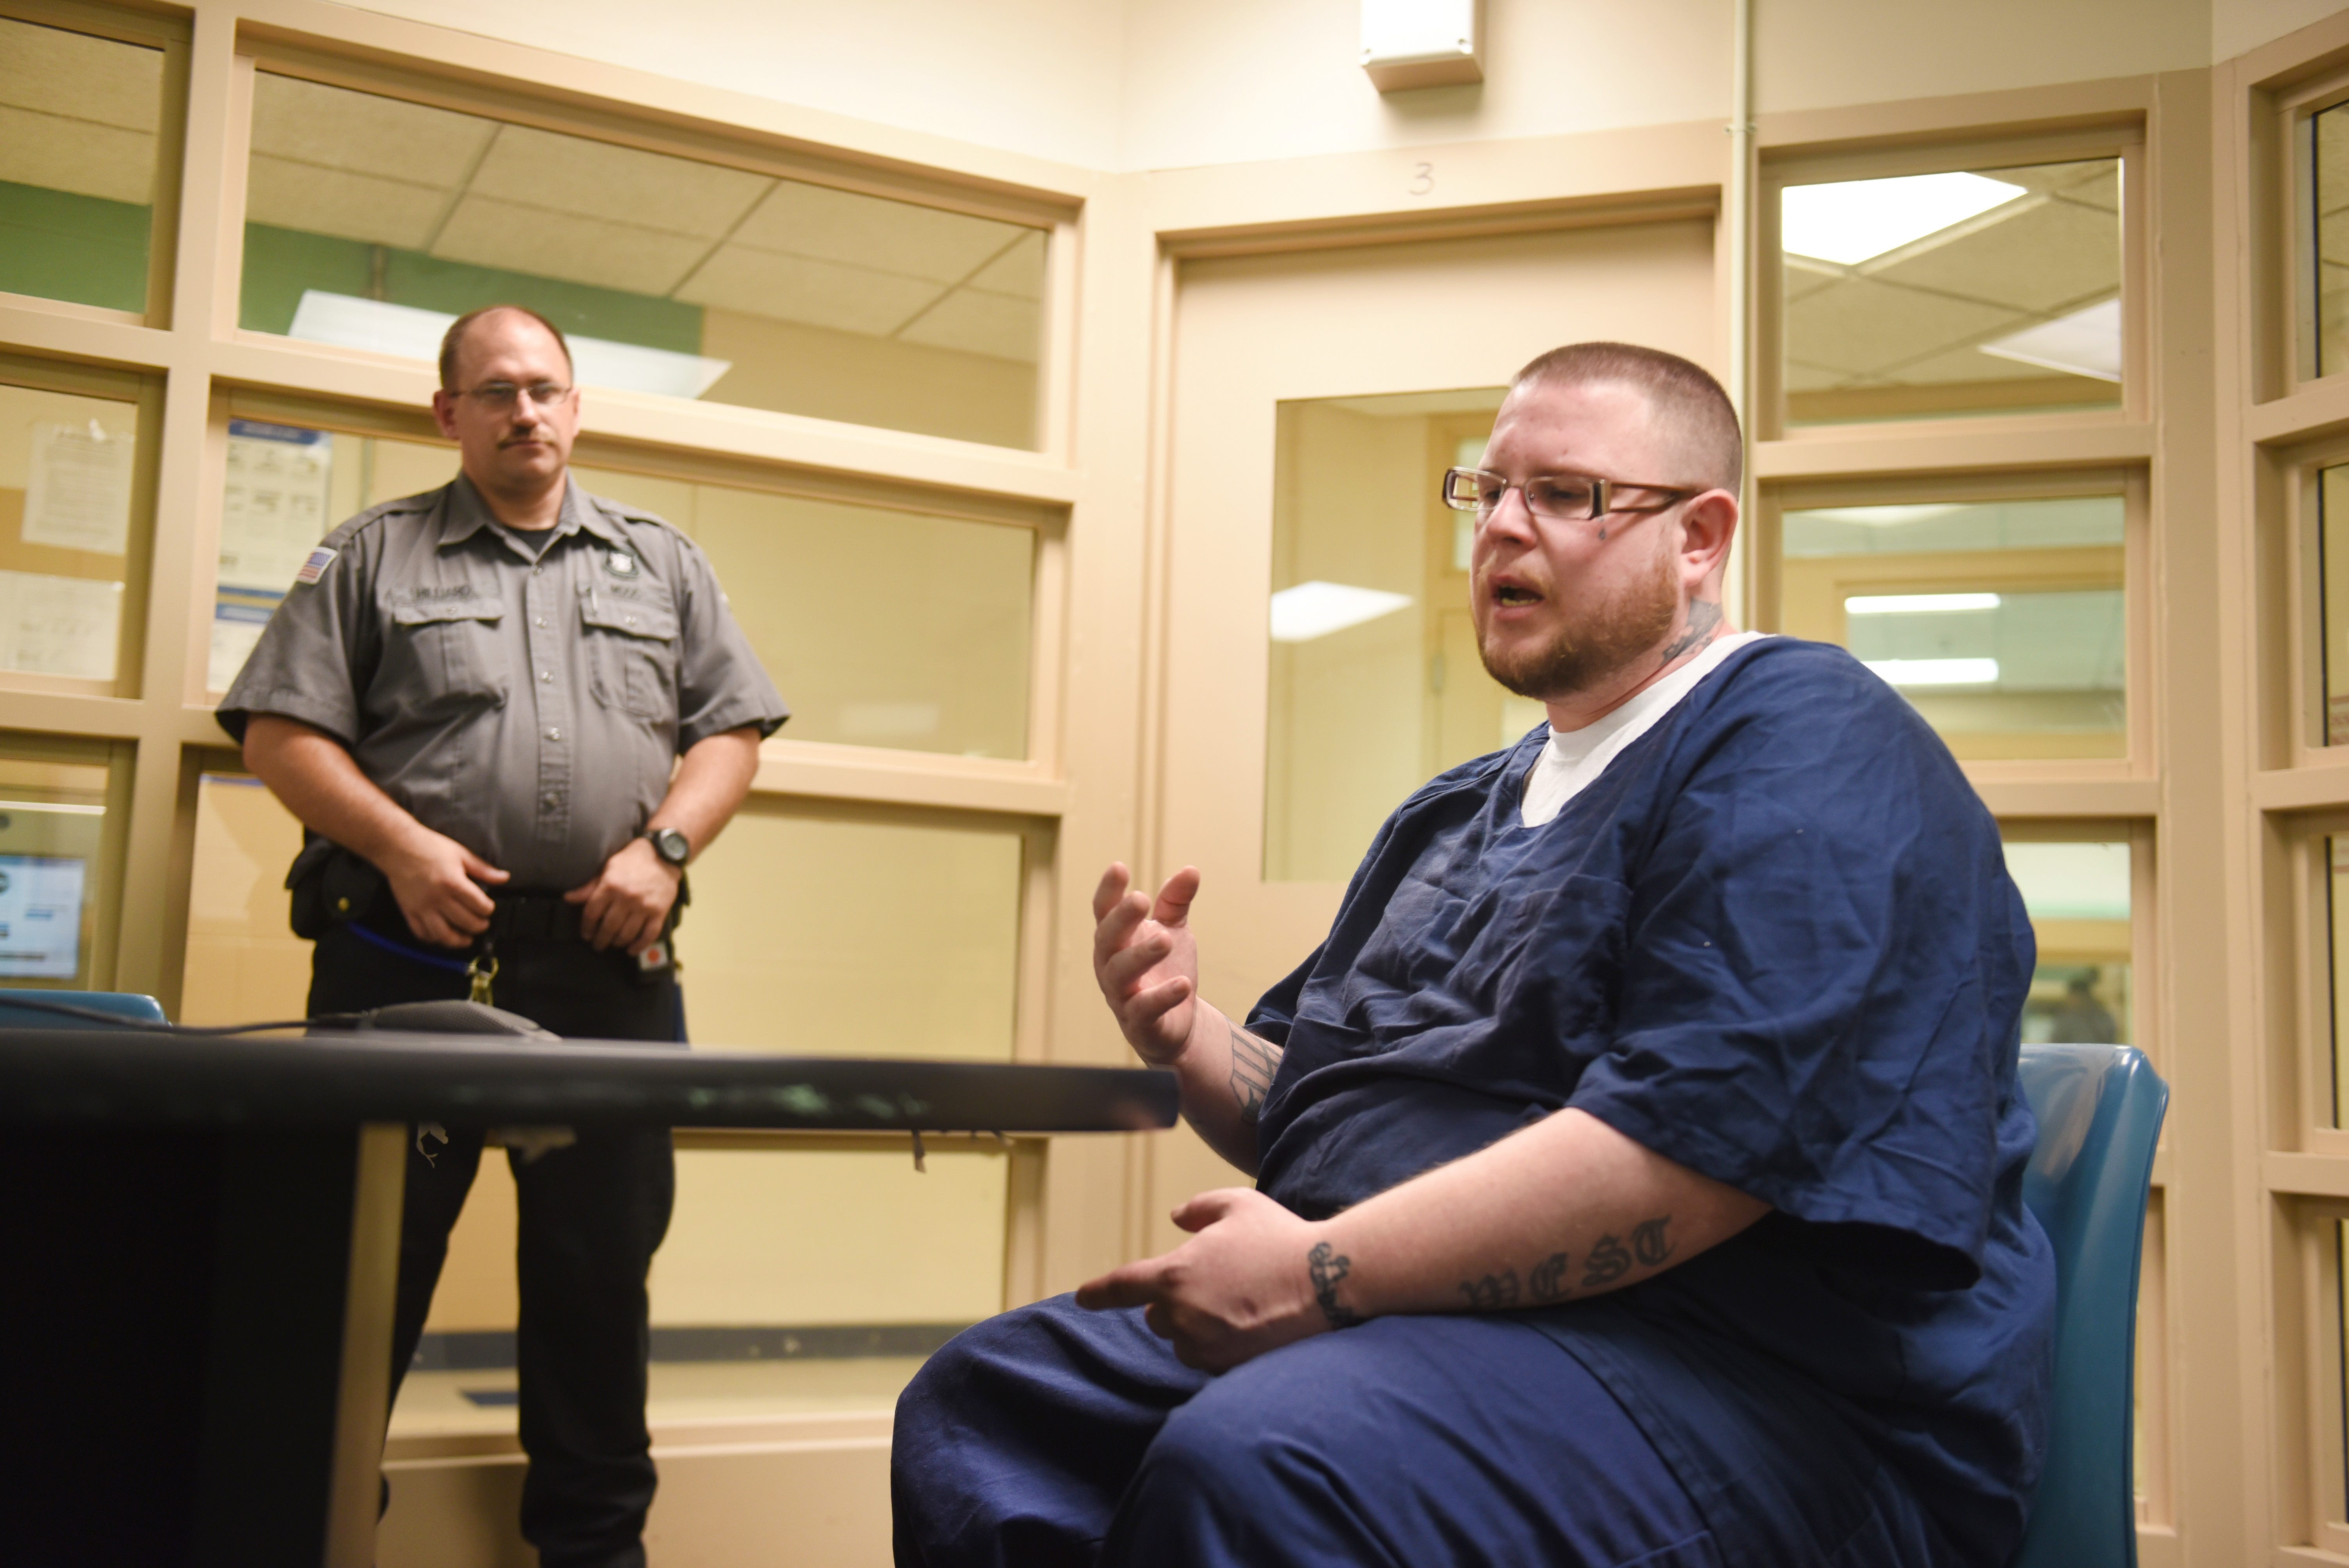 "It's different at other prisons than here," said inmate Christopher Goike at the Woodland Center Correctional Center. "You don’t get to work with your caseworker as much (at other prisons)."